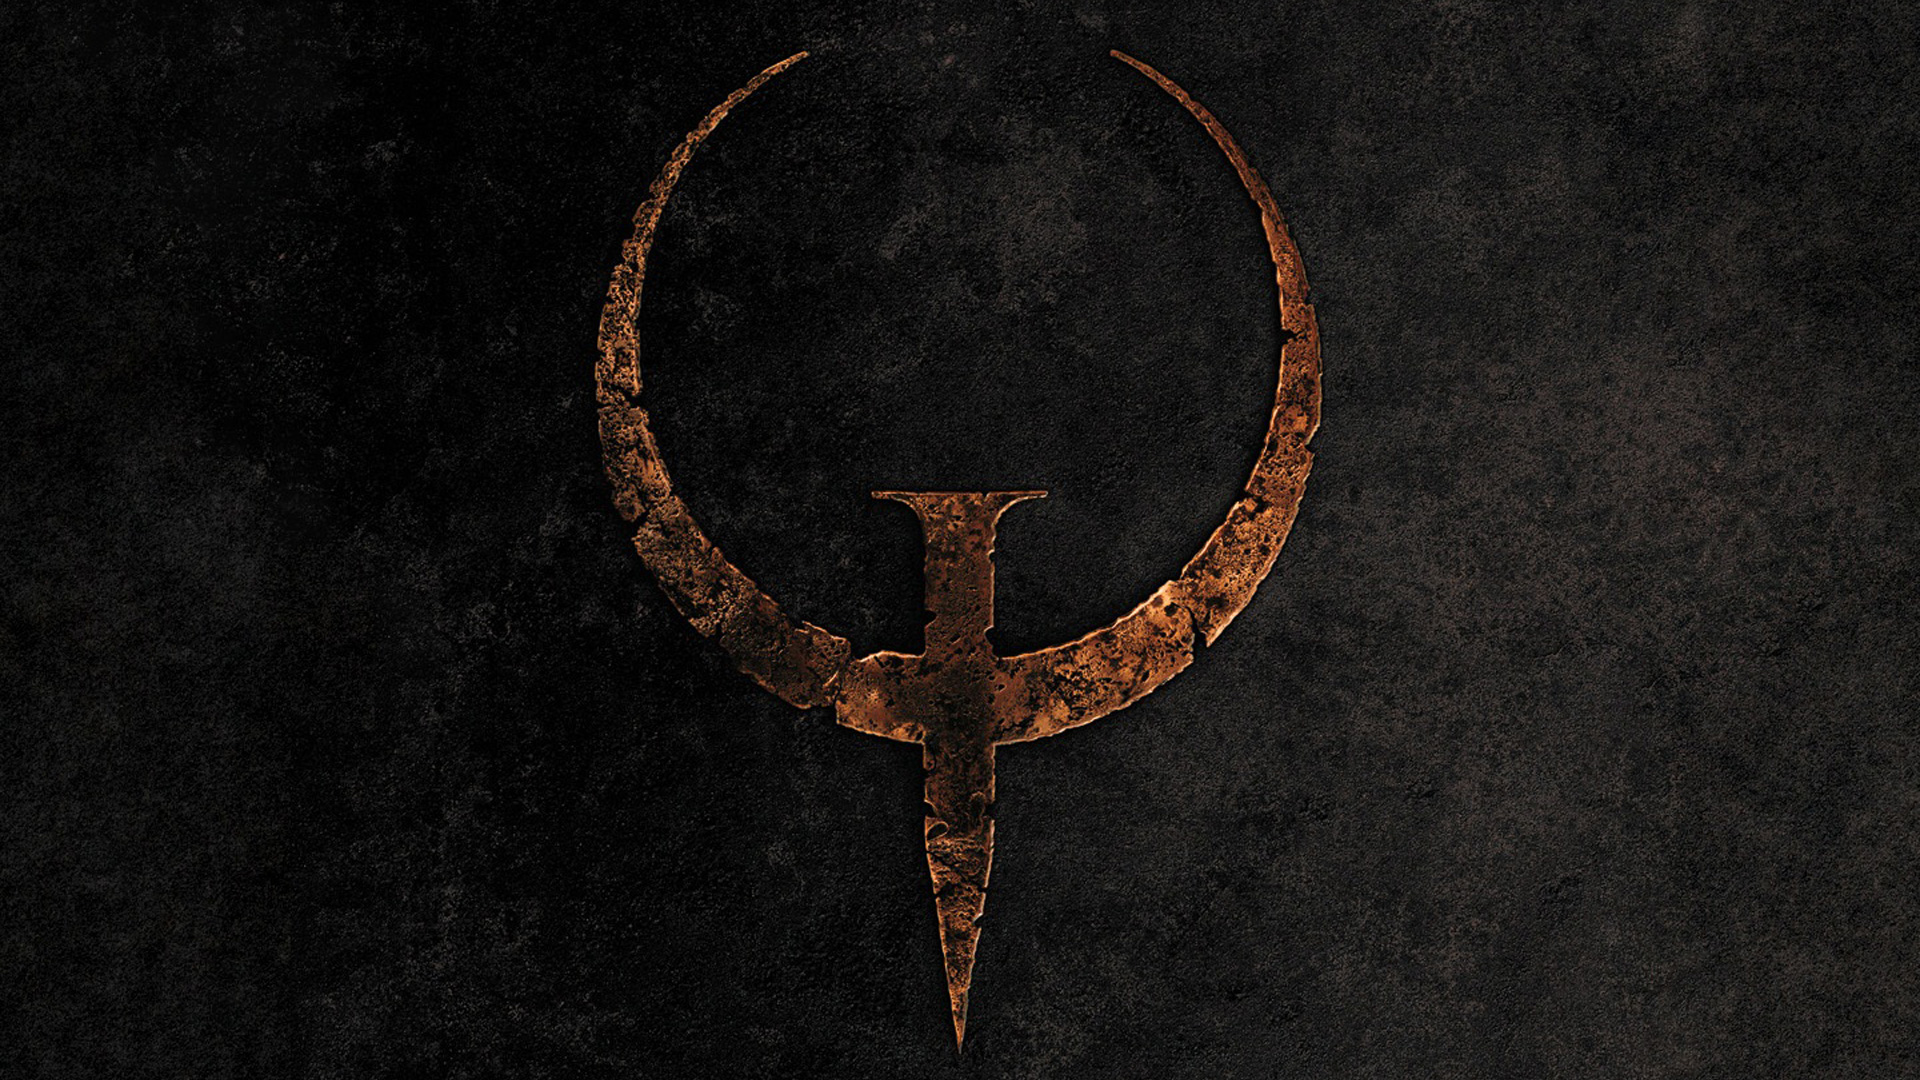 quake, video game 4K for PC